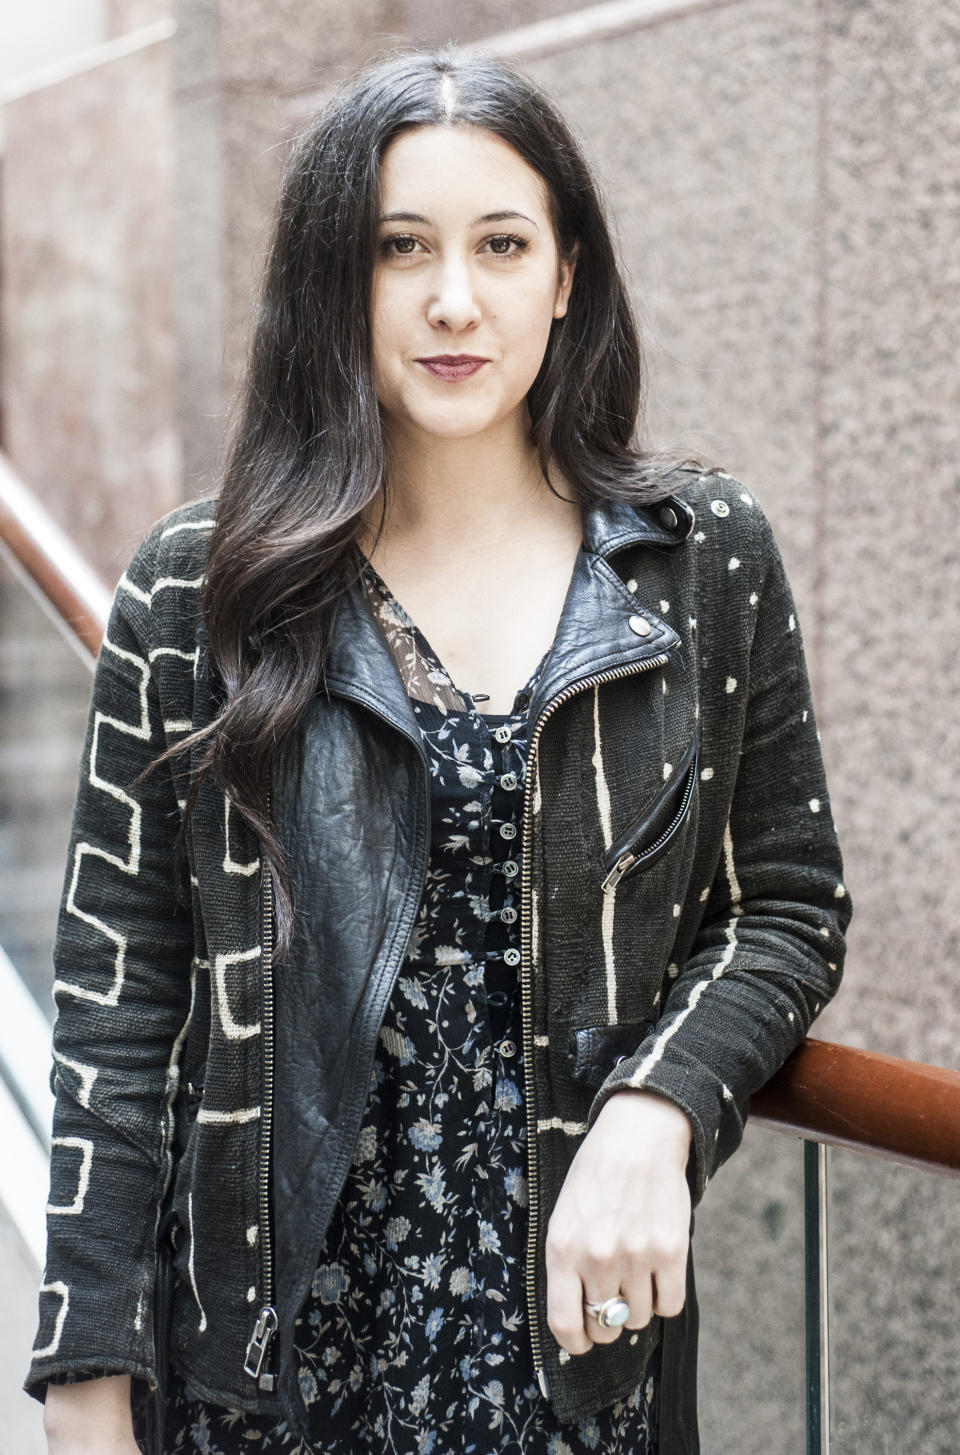 Musician Vanessa Carlton <a href="http://www.huffingtonpost.com/2010/06/20/vannesa-carlton-im-bisexu_n_618697.html" target="_blank">came out publicly</a> at 2010's Nashville Pride, announcing to a crowd of 18,000 that, "I've never said this before, but I am a proud bisexual woman!"